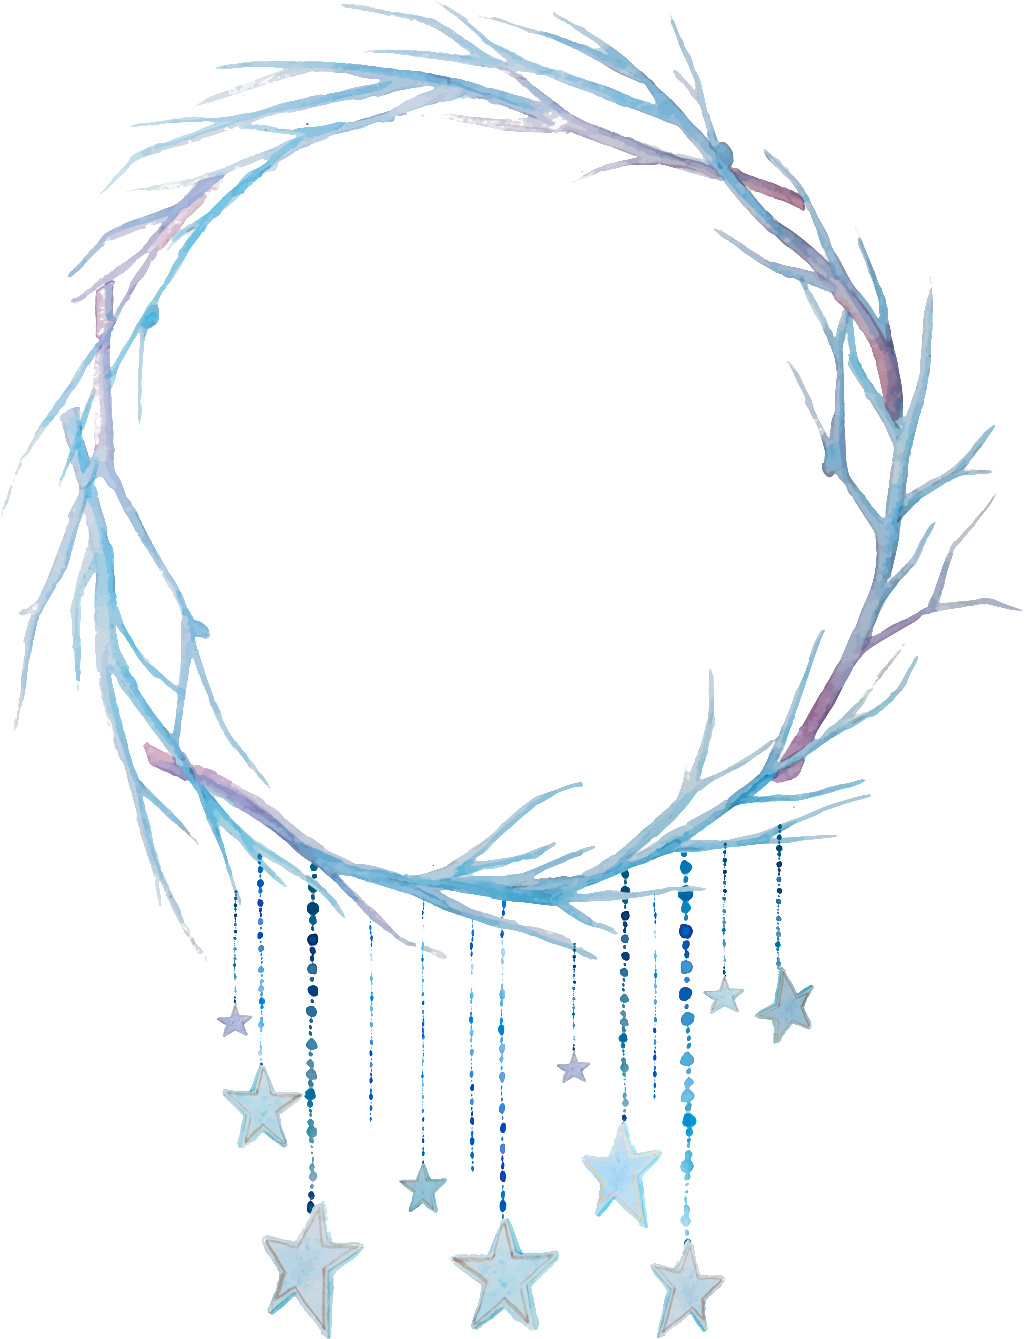 Blue Dreamcatcher Wreath Illustration Creative Watercolor Hand-Painted PNG Image